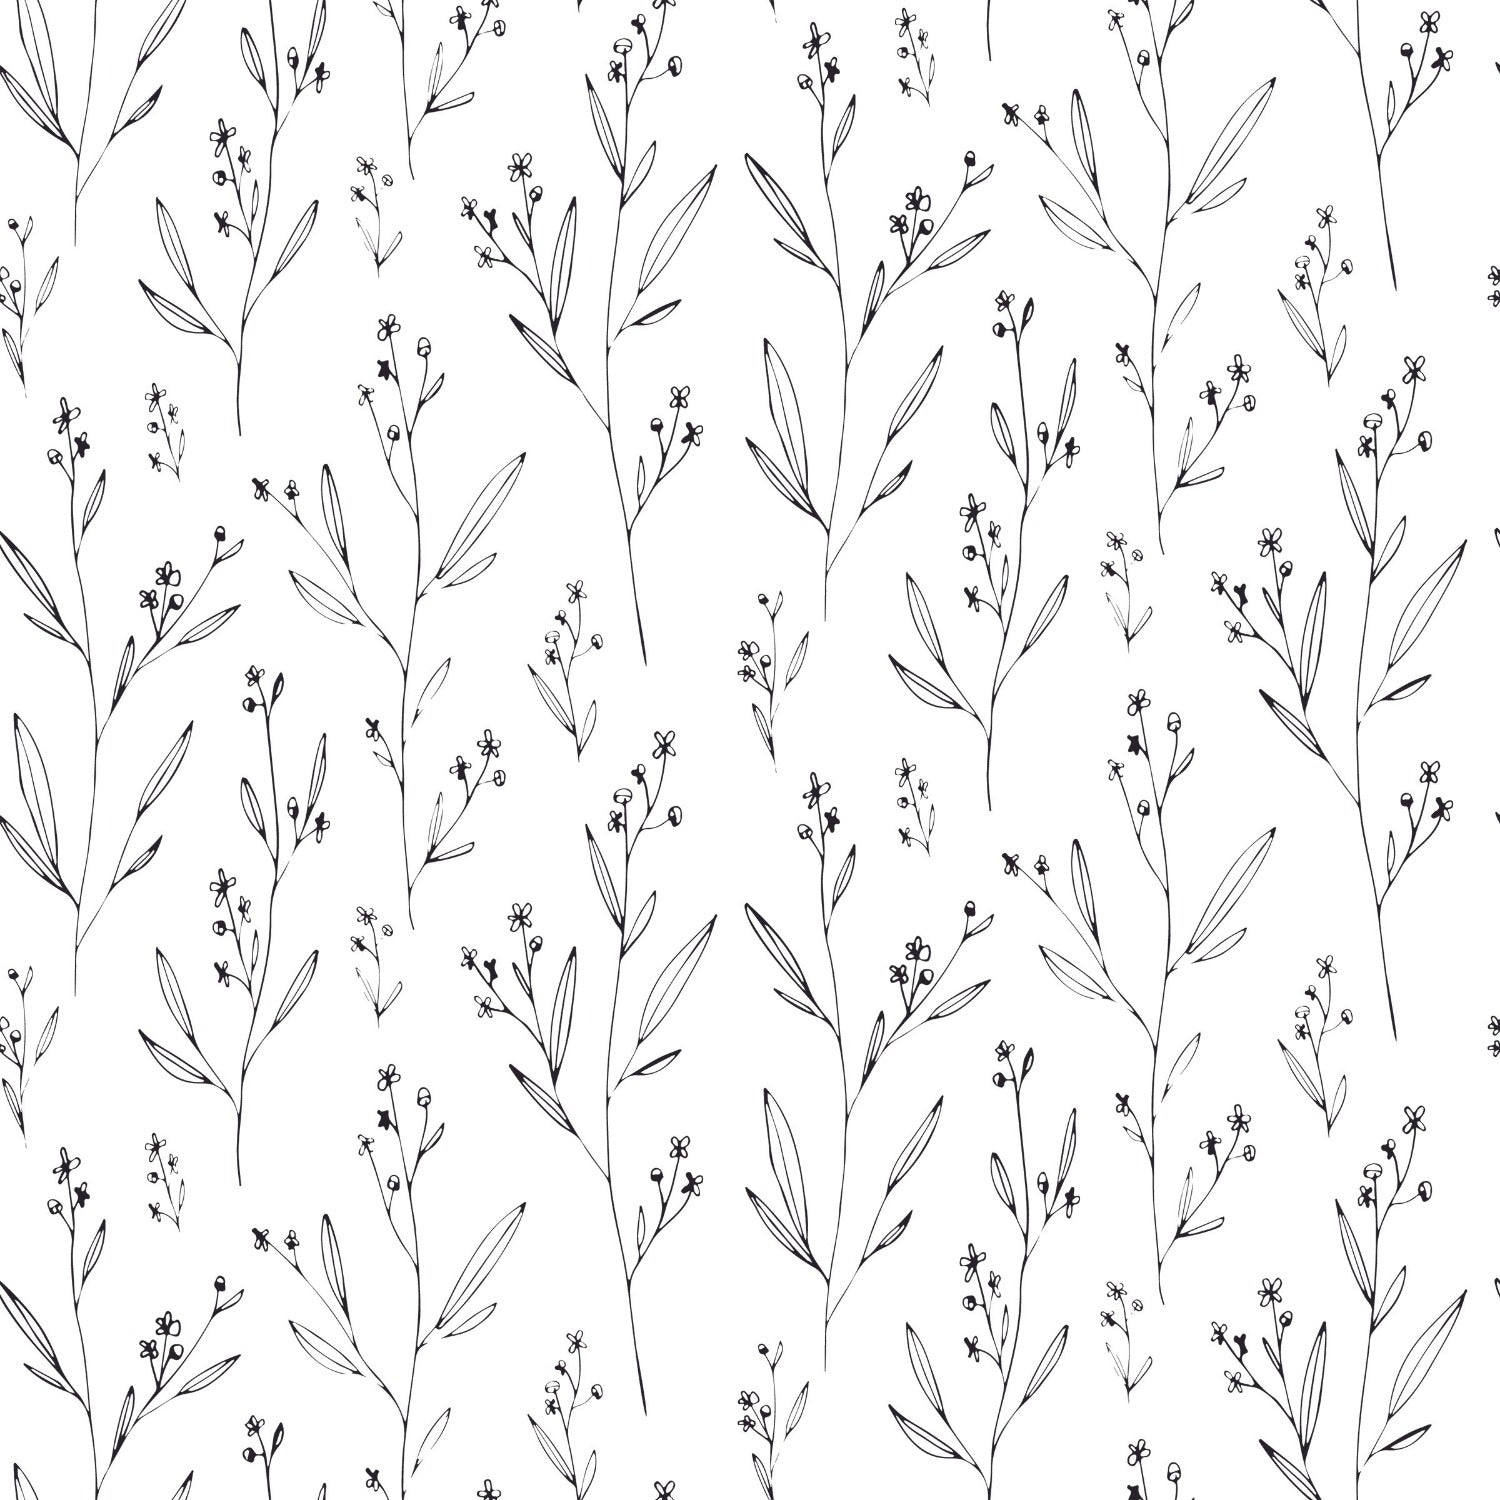 Dainty Black Floral Wallpaper with a seamless pattern of delicate black floral illustrations on a white background.